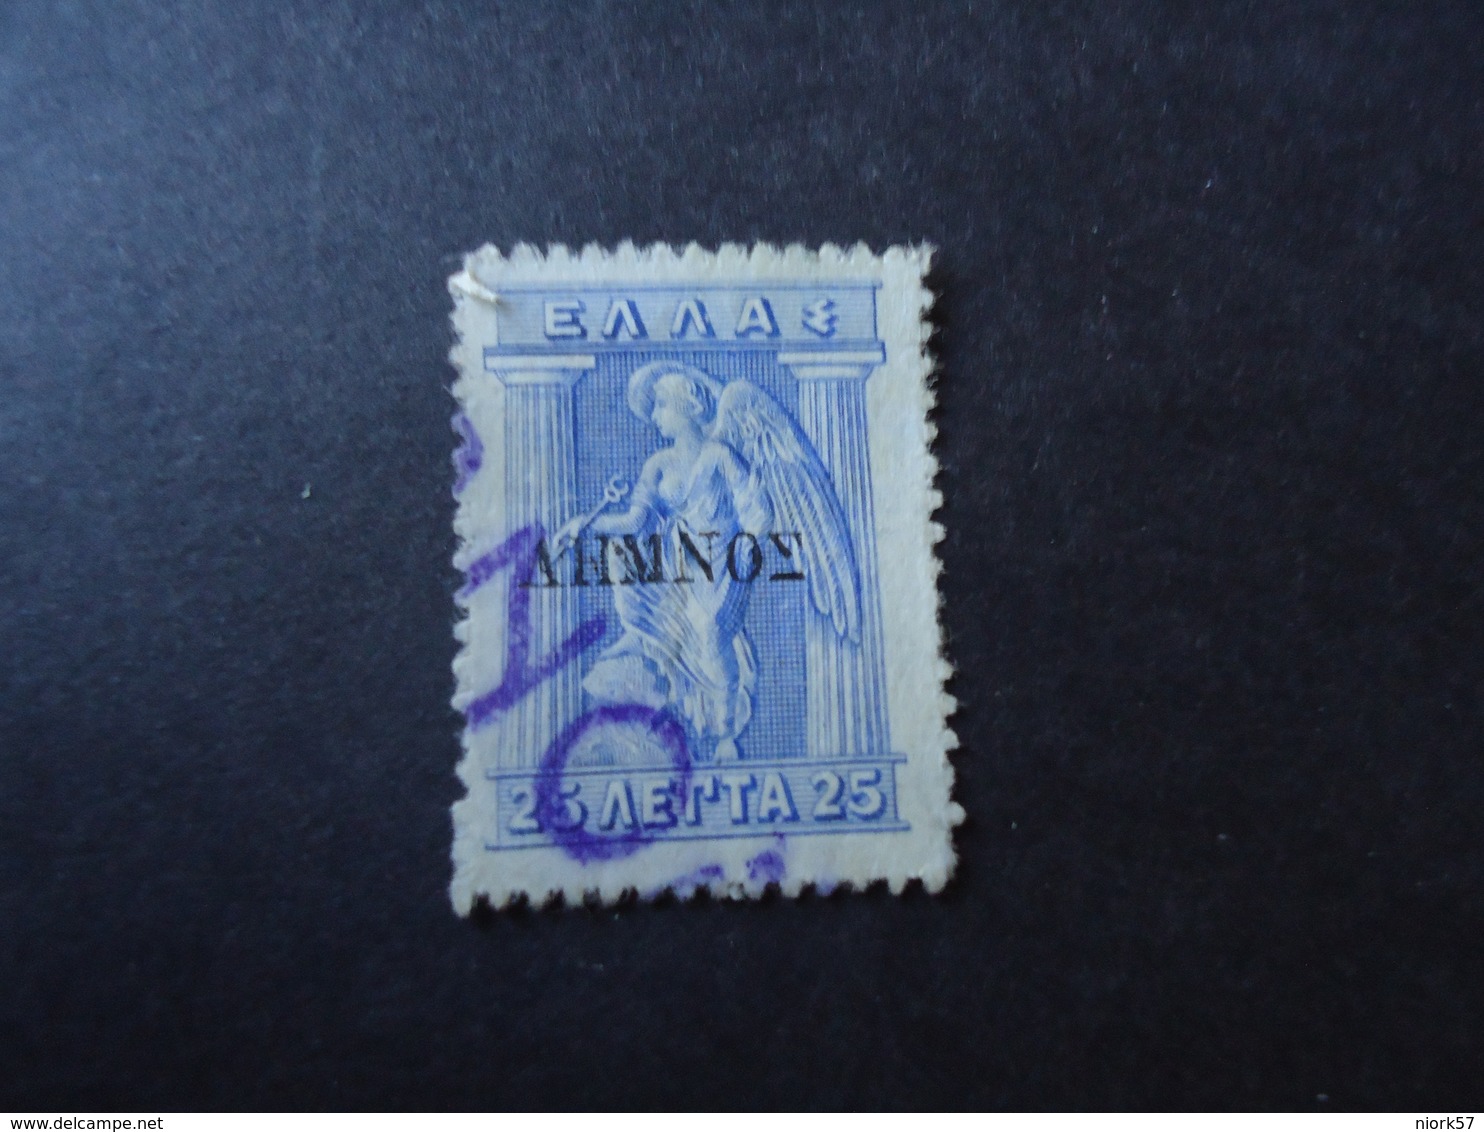 CRETE LEMNOS  GREECE USED STAMPS   WITH POSTMARK  RETHYMNON - Unclassified